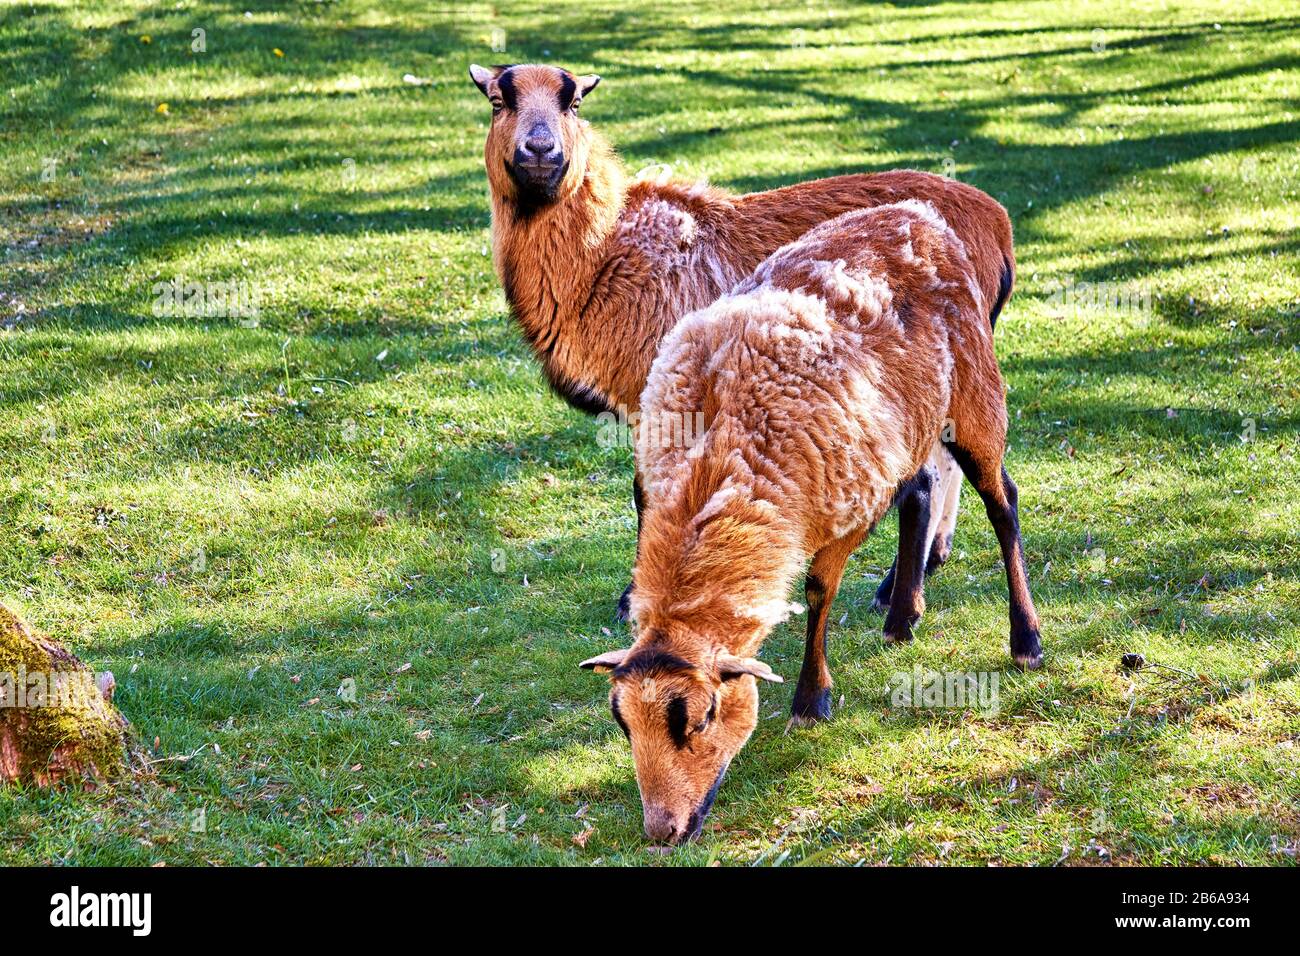 Cameroon sheep graze in a green pasture. Breed Ovis aries. Stock Photo